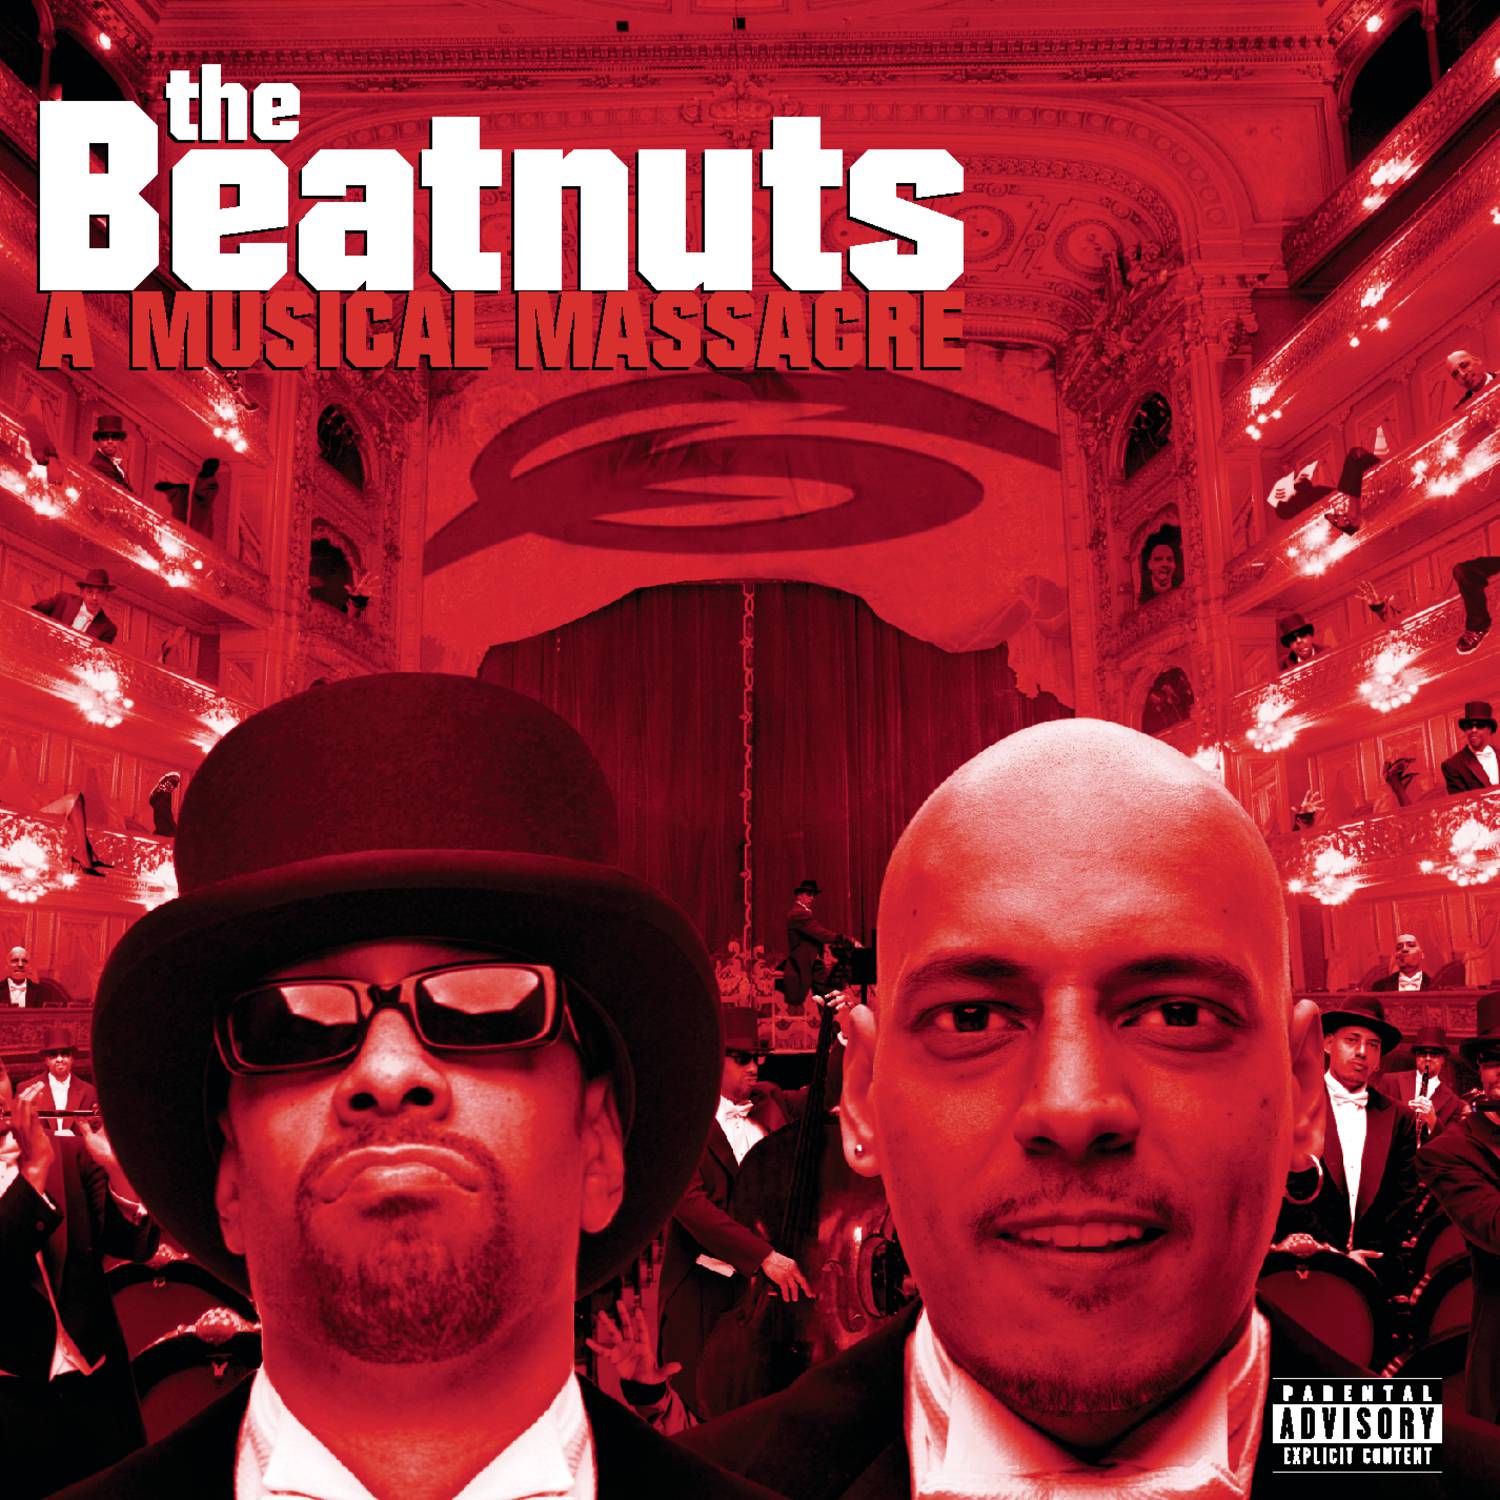 Beatnuts Forever featuring Triple Seis and Marlon "Perro" Manson (Explicit Version) - Explicit Version